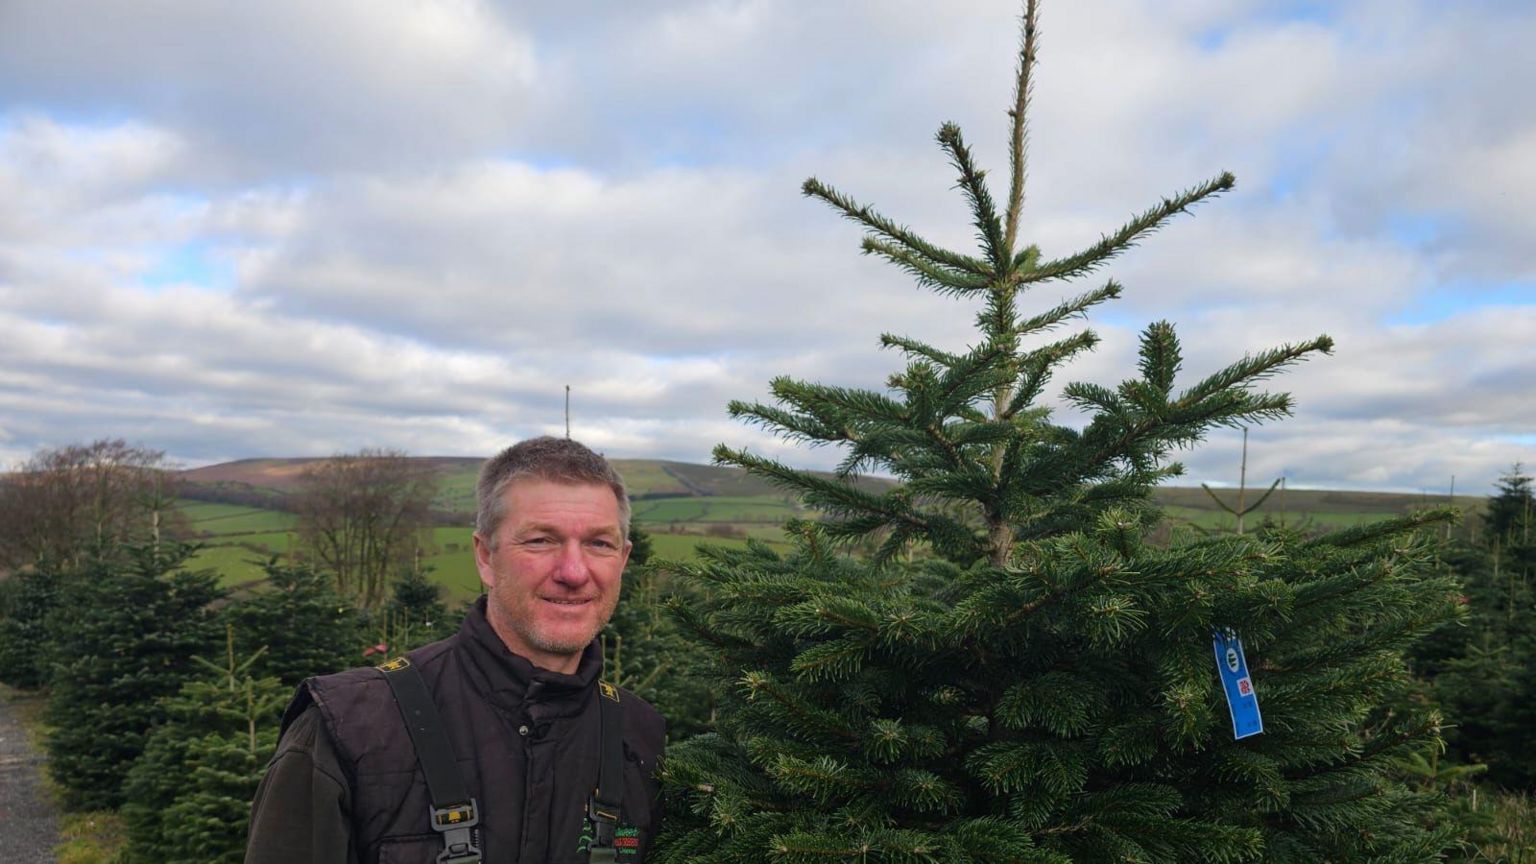  Man standing in Christmas tree farm next to large Christmas tree with trees behind him